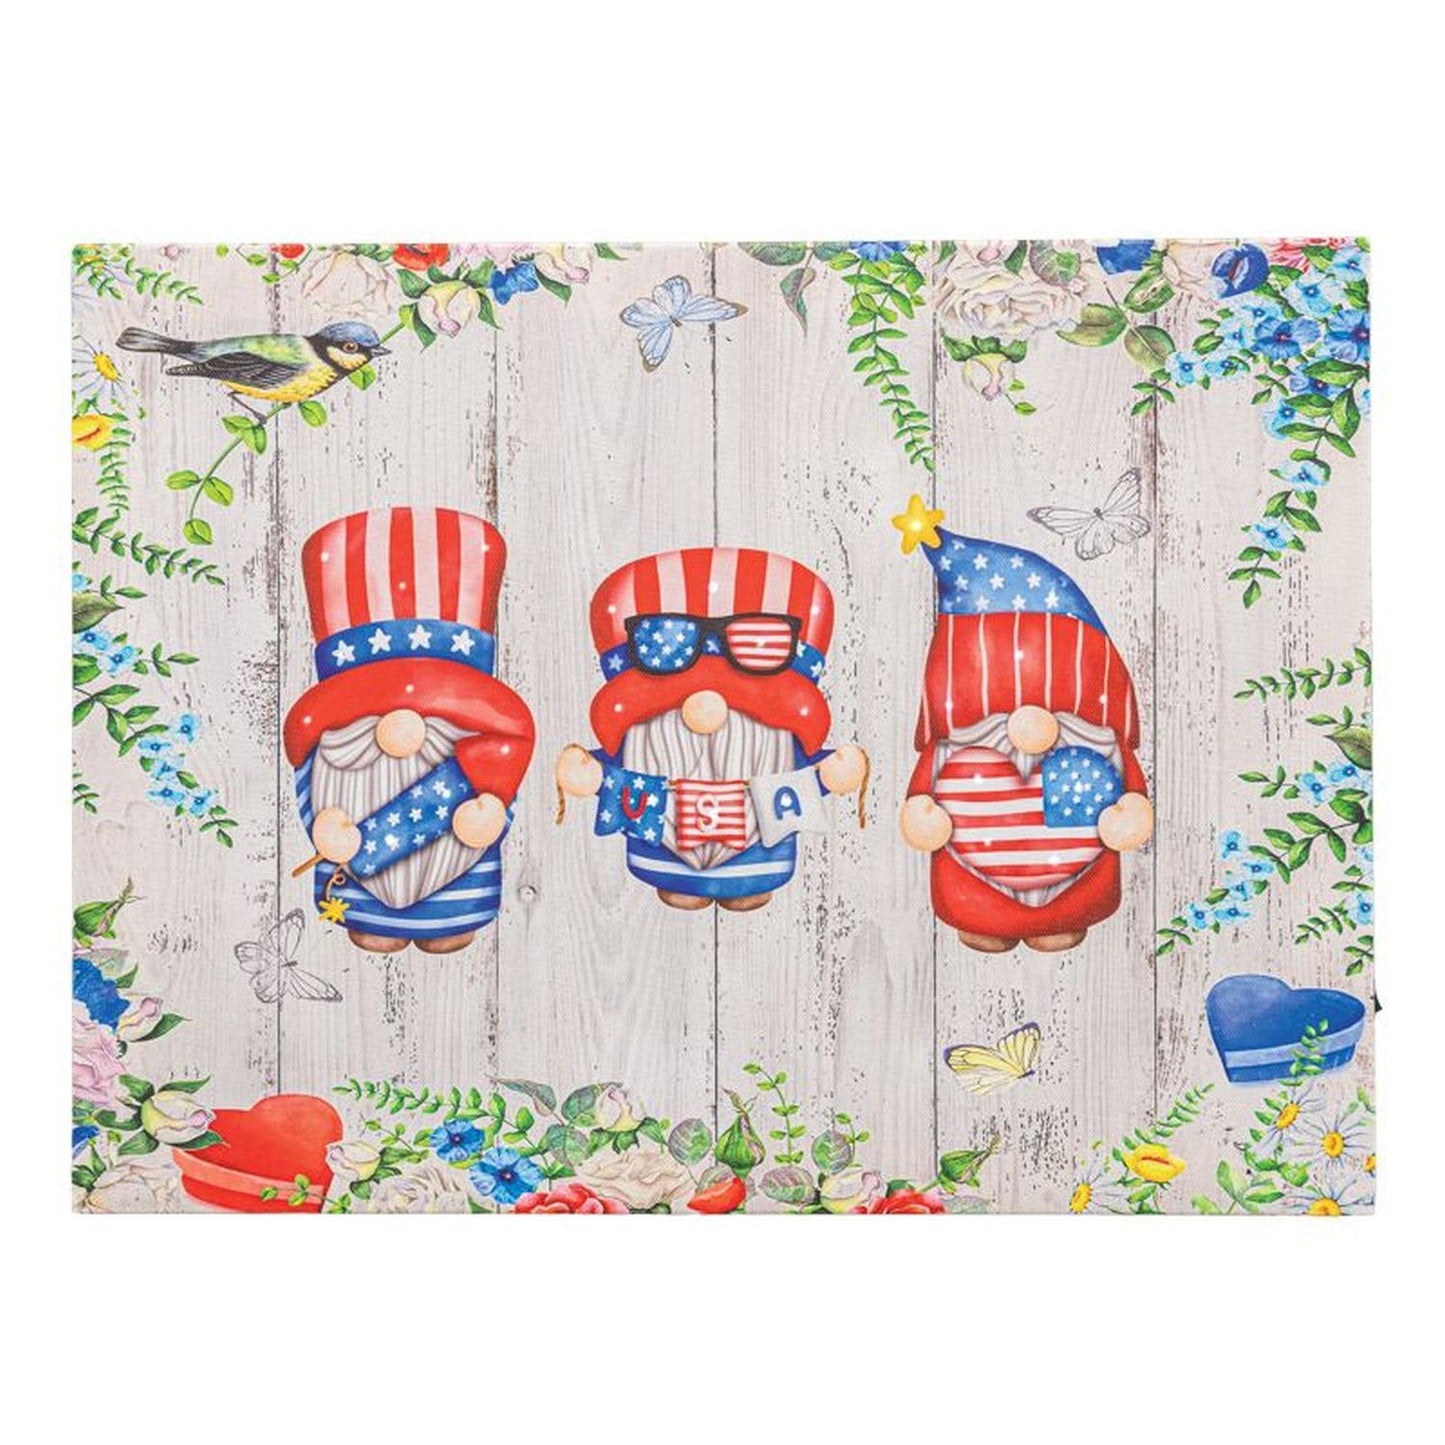 Hanna's Handiworks Patriotic Gnome Canvas With Led